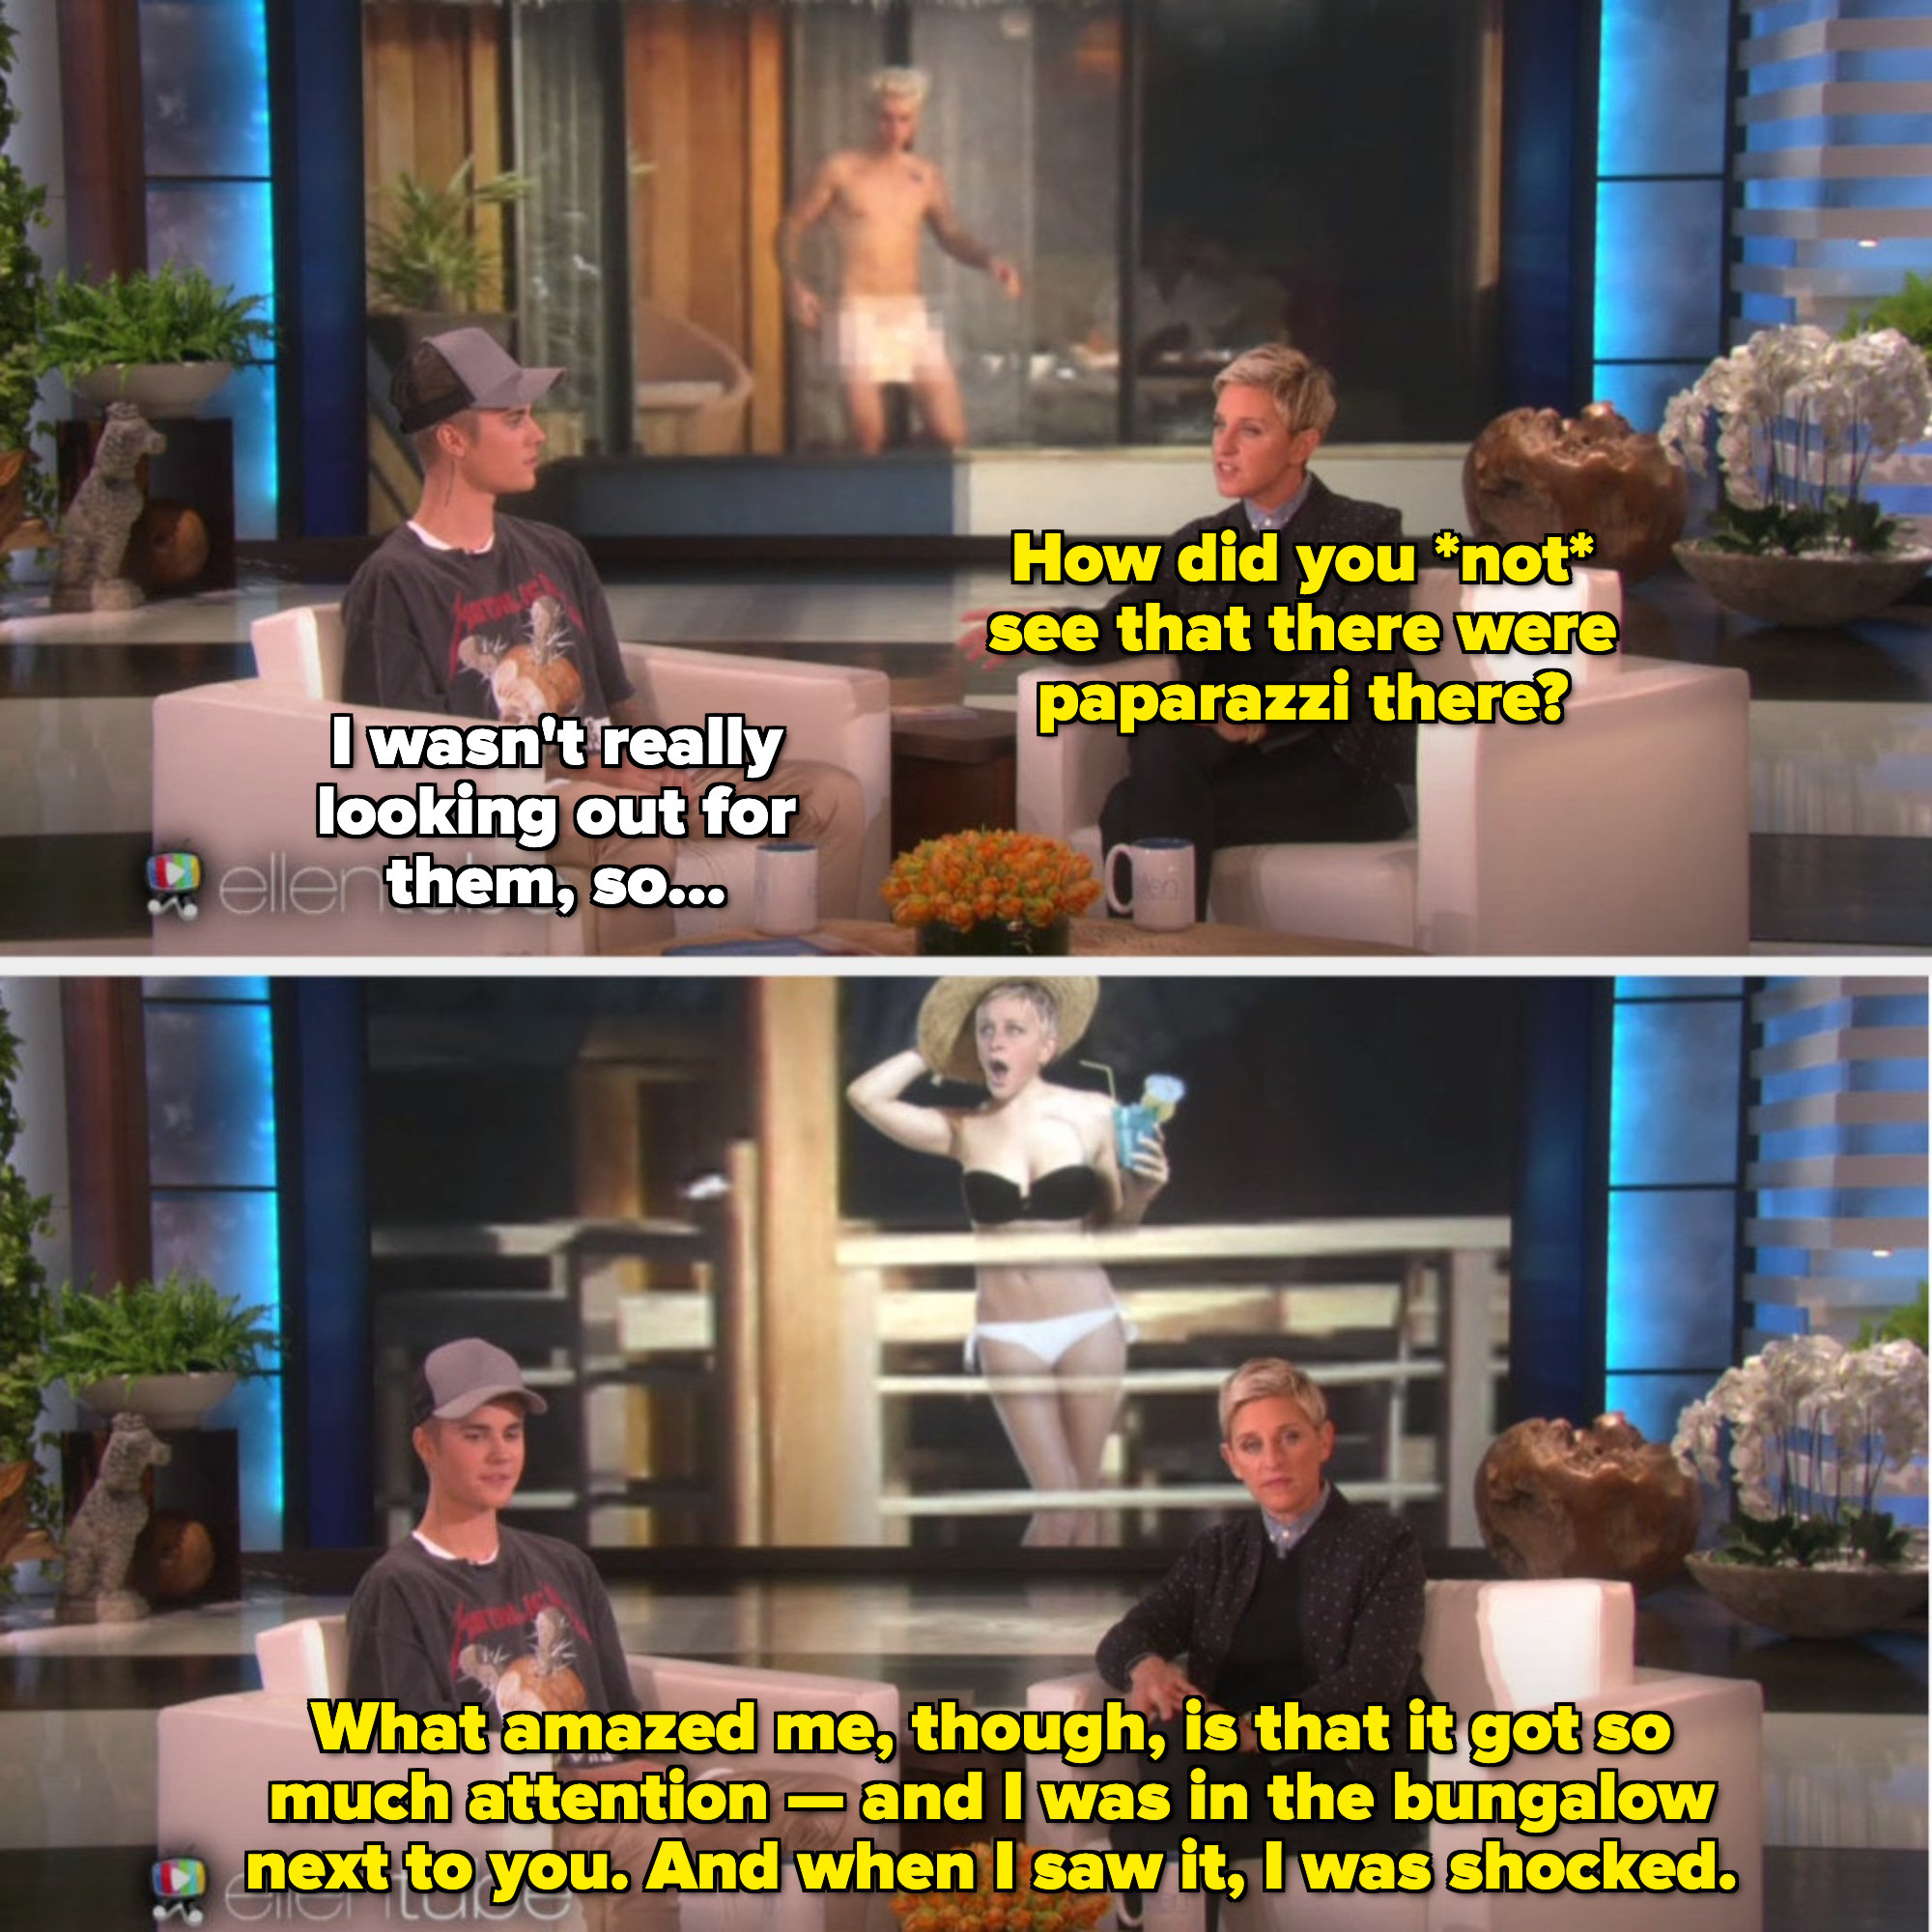 Degeneres asking Bieber how he didn&#x27;t notice the paparazzi taking naked pictures of him, and then showing him a photoshopped image of herself in disbelief over his nakedness